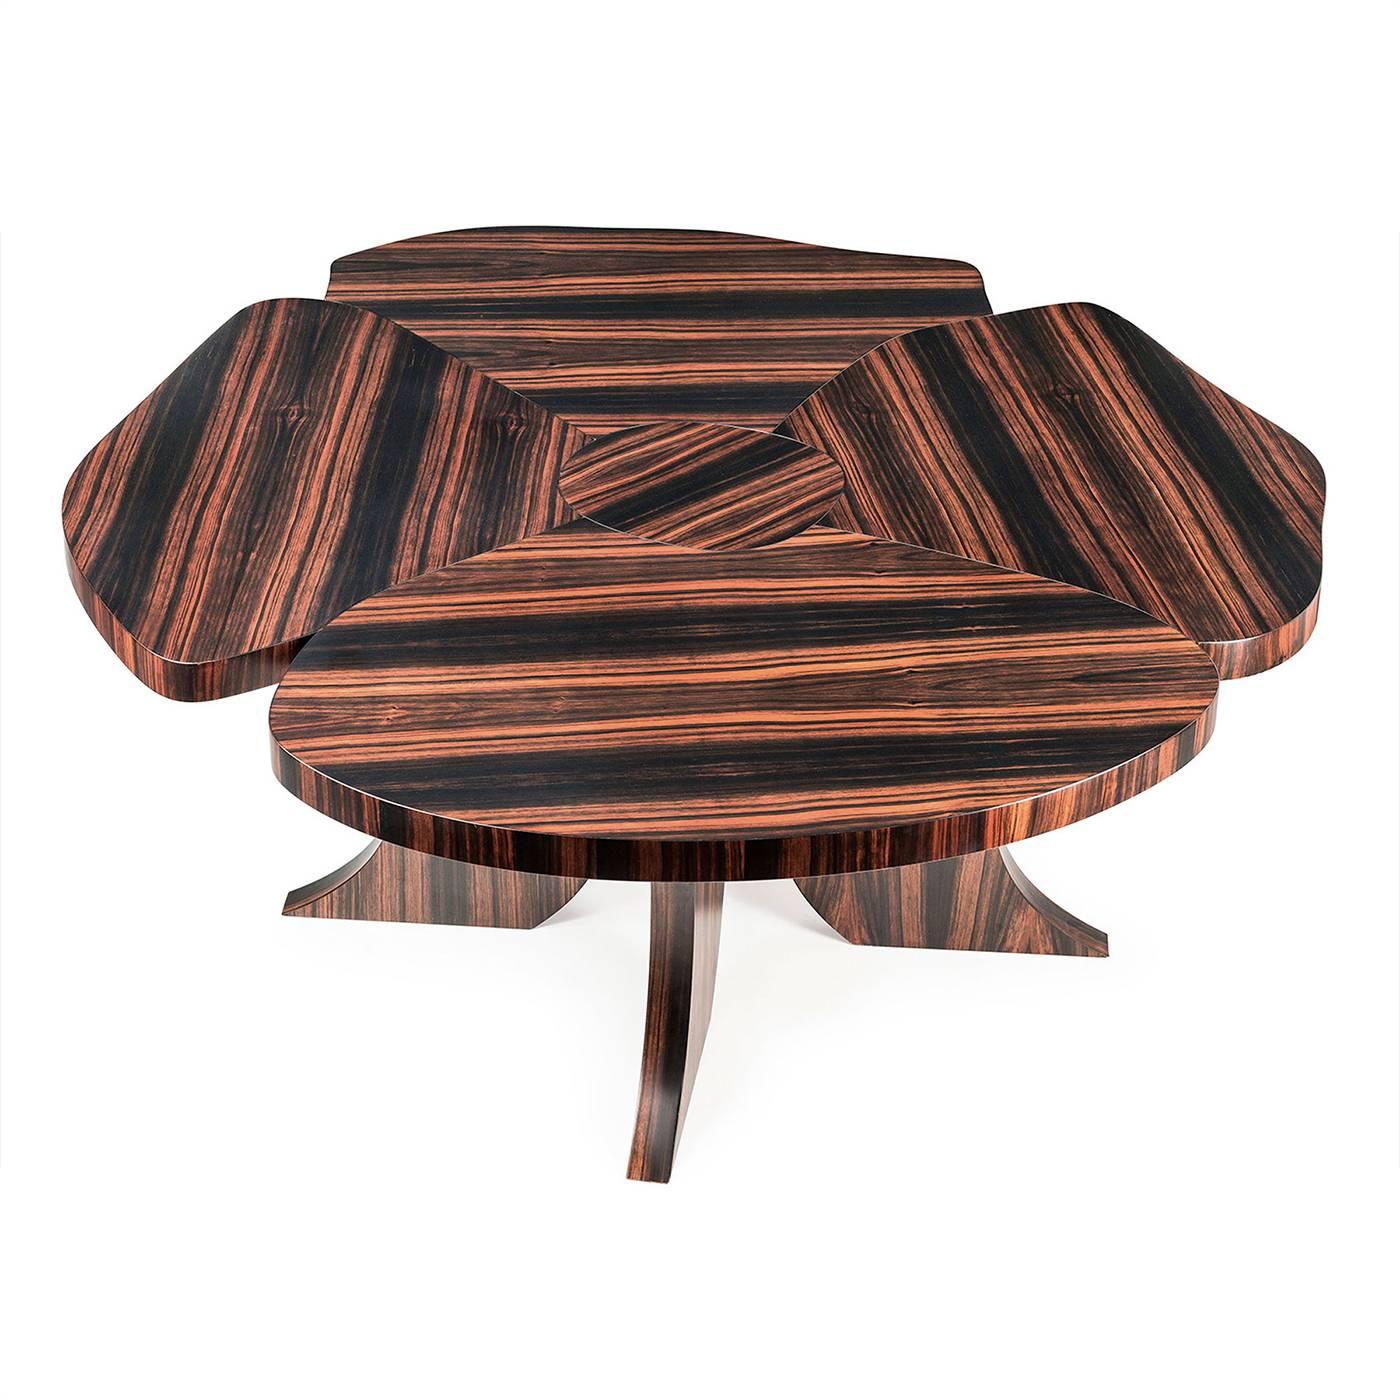 Part of the Andy collection, this table is made entirely in precious ebony wood with a lacquered finish that enhances the natural veins of the wood. The curved four legs and the top, in the shape of an opened flower, are staples of the Andy series